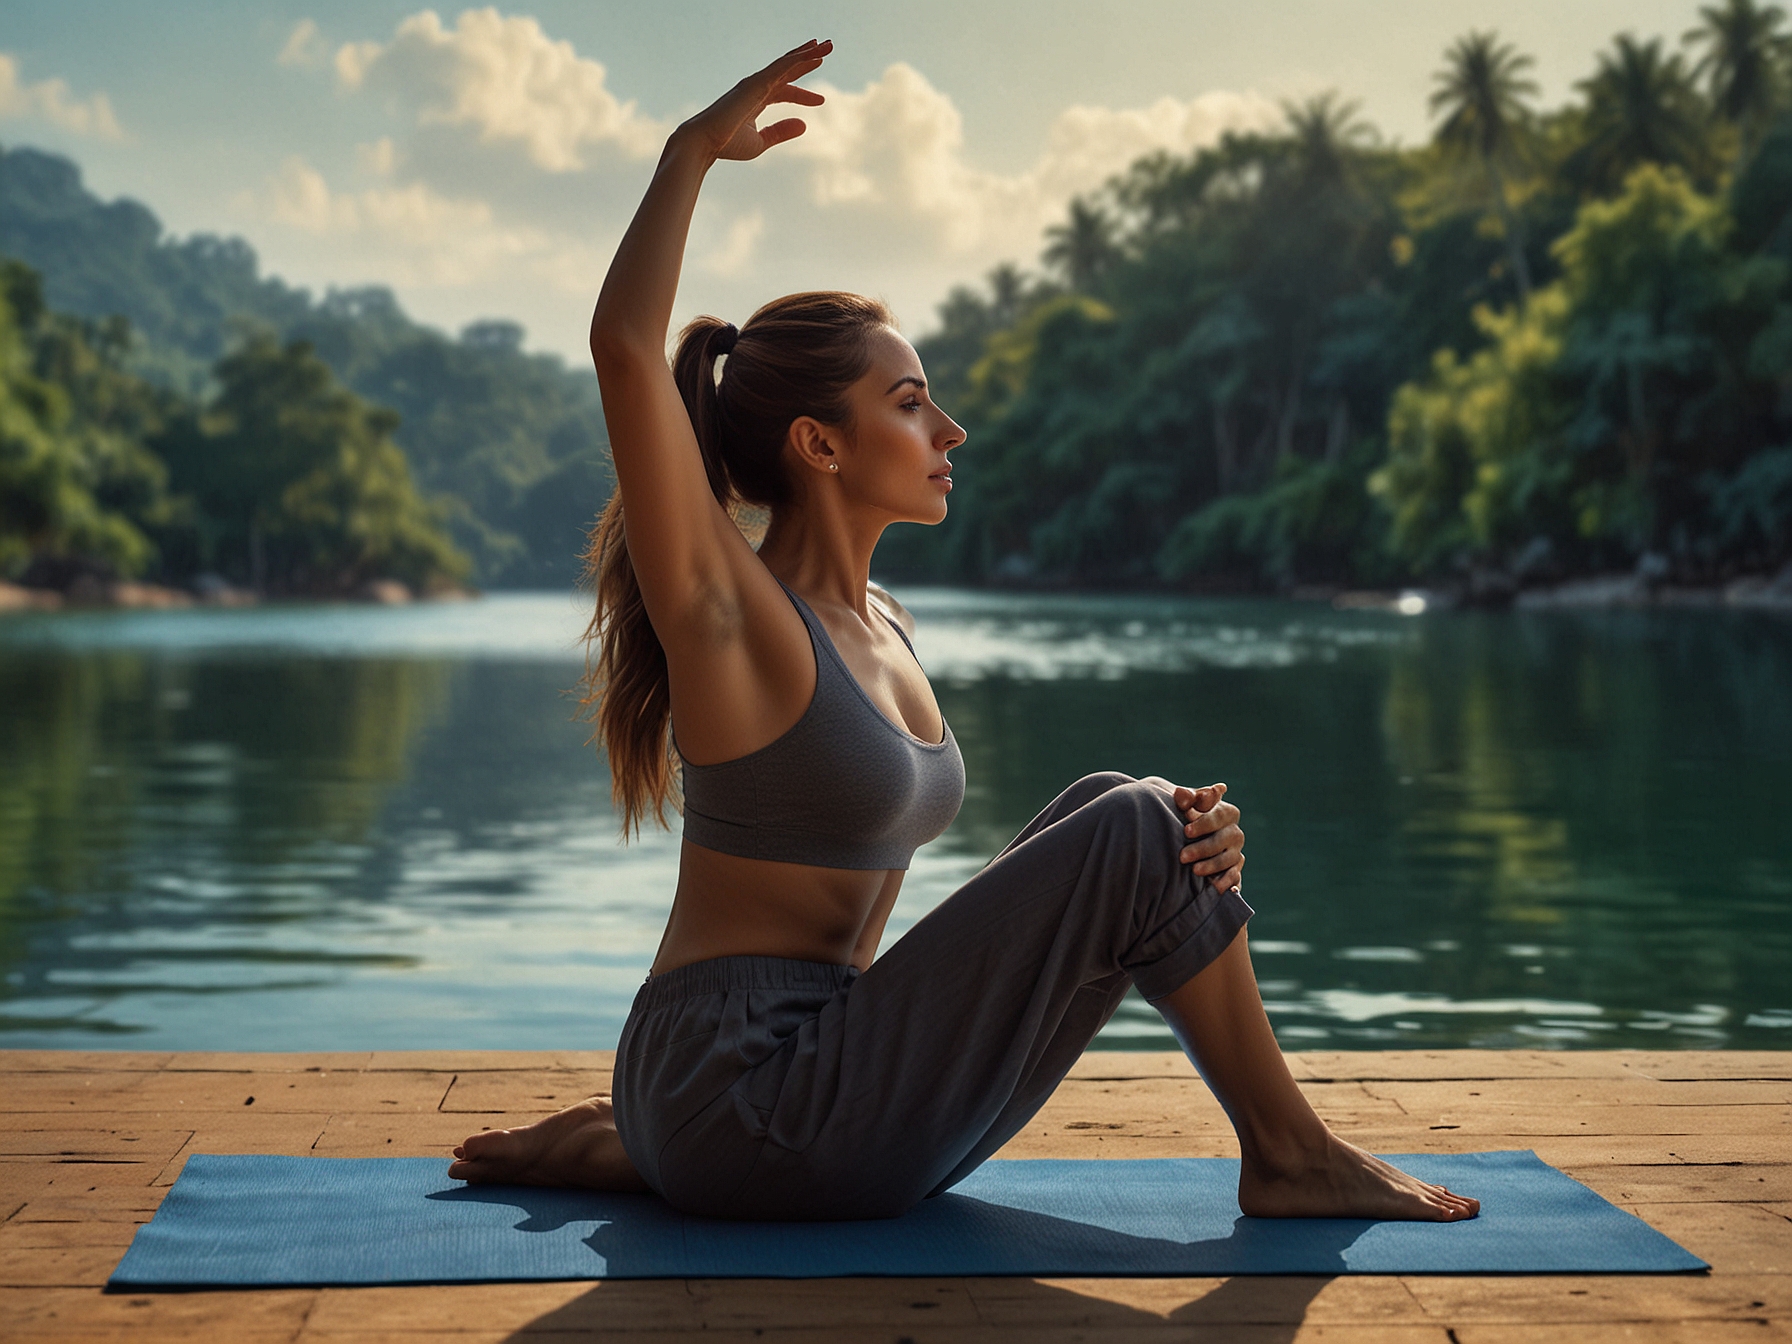 Malaika Arora performing a yoga pose with serene background, symbolizing physical and mental wellness. The image underscores the importance of yoga in balancing a demanding lifestyle.